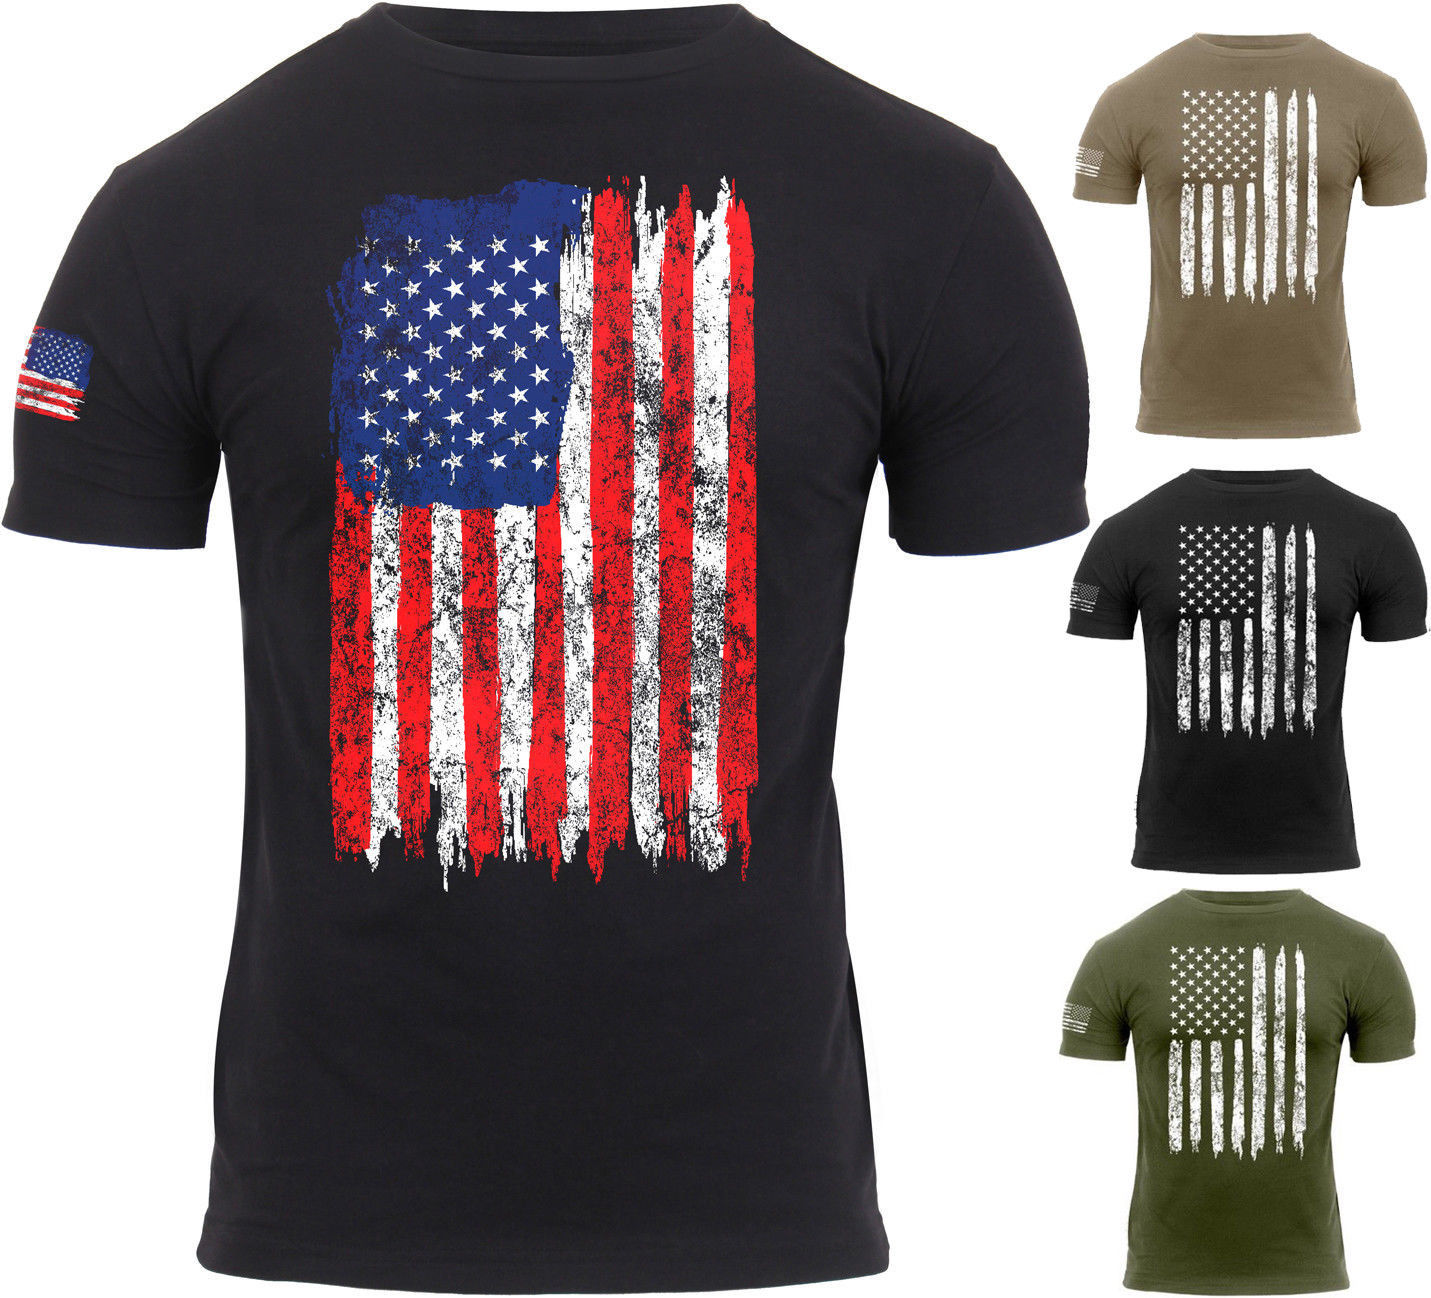 Mens Us Flag Athletic T Shirt Muscle Build Tactical Tee American Patriotic Usa T Shirts Tank Tops 